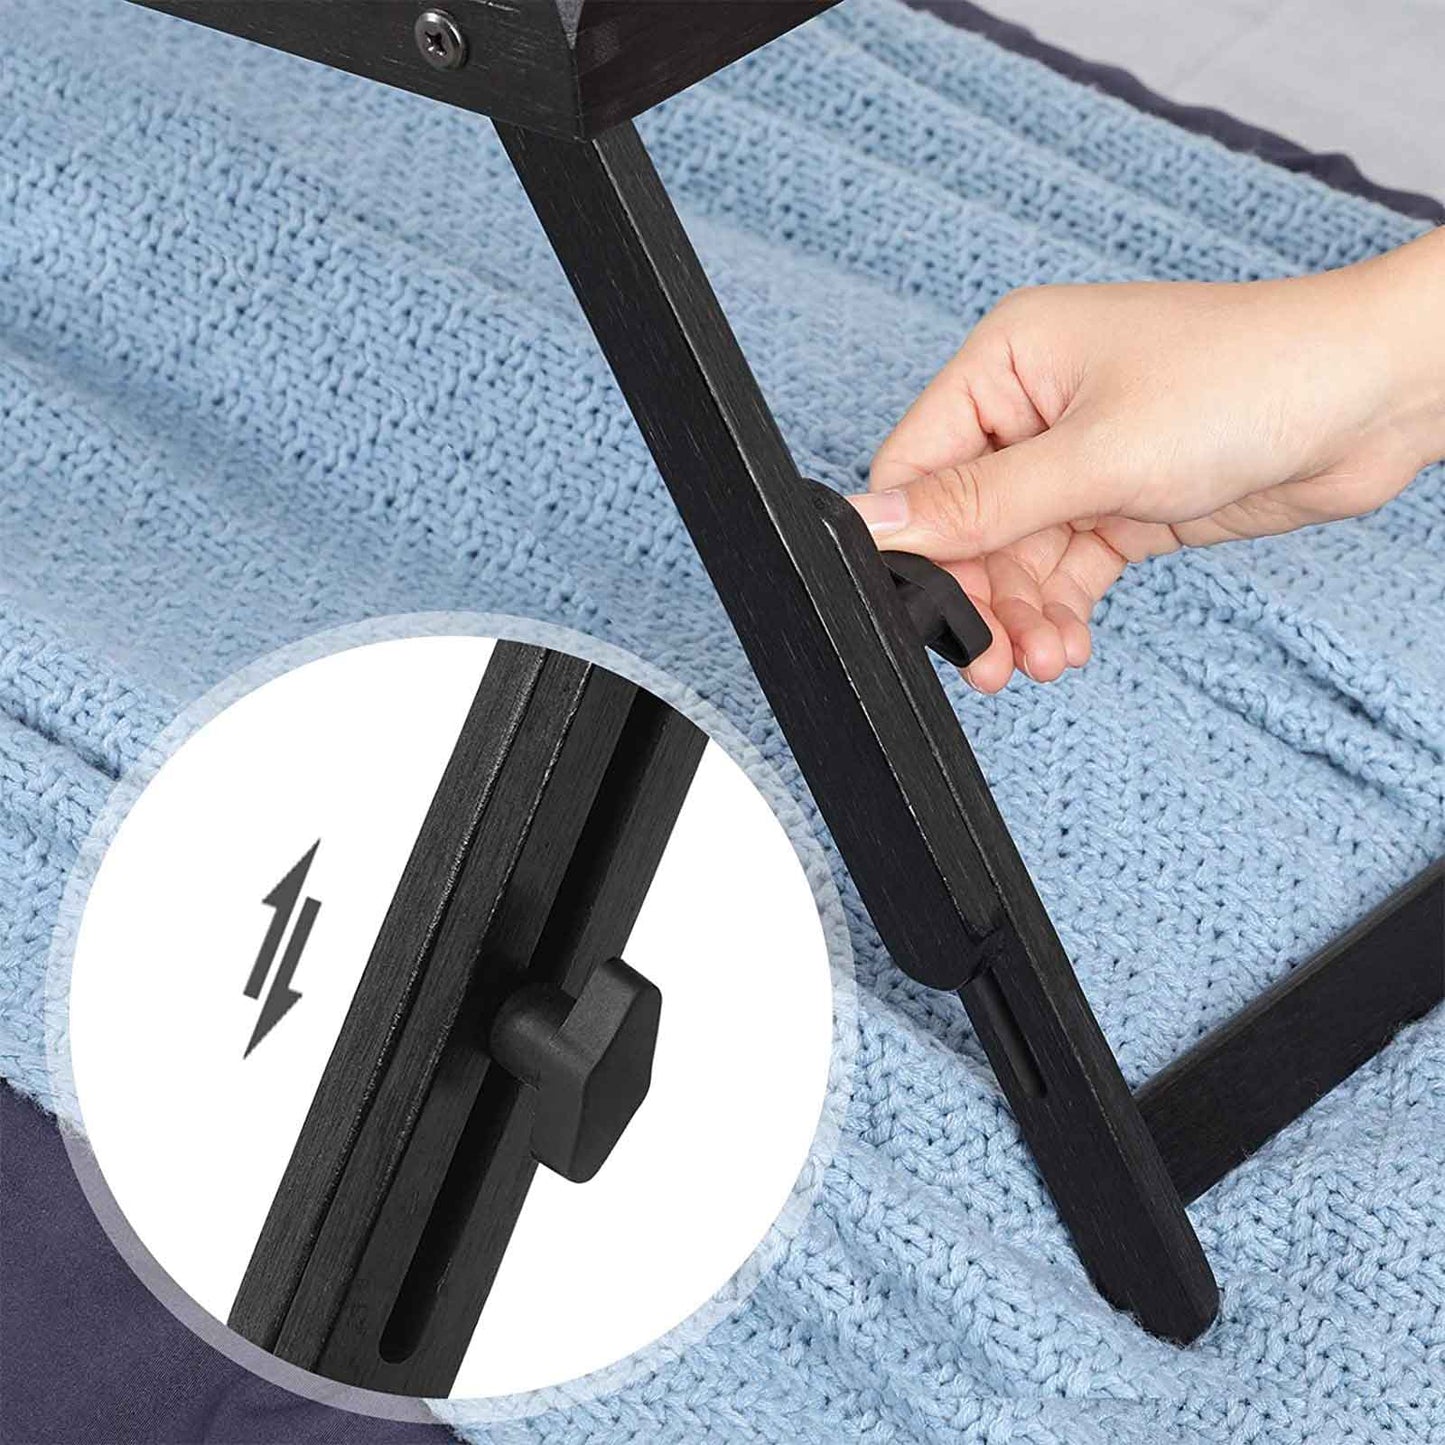 Laptop stand with foldable legs